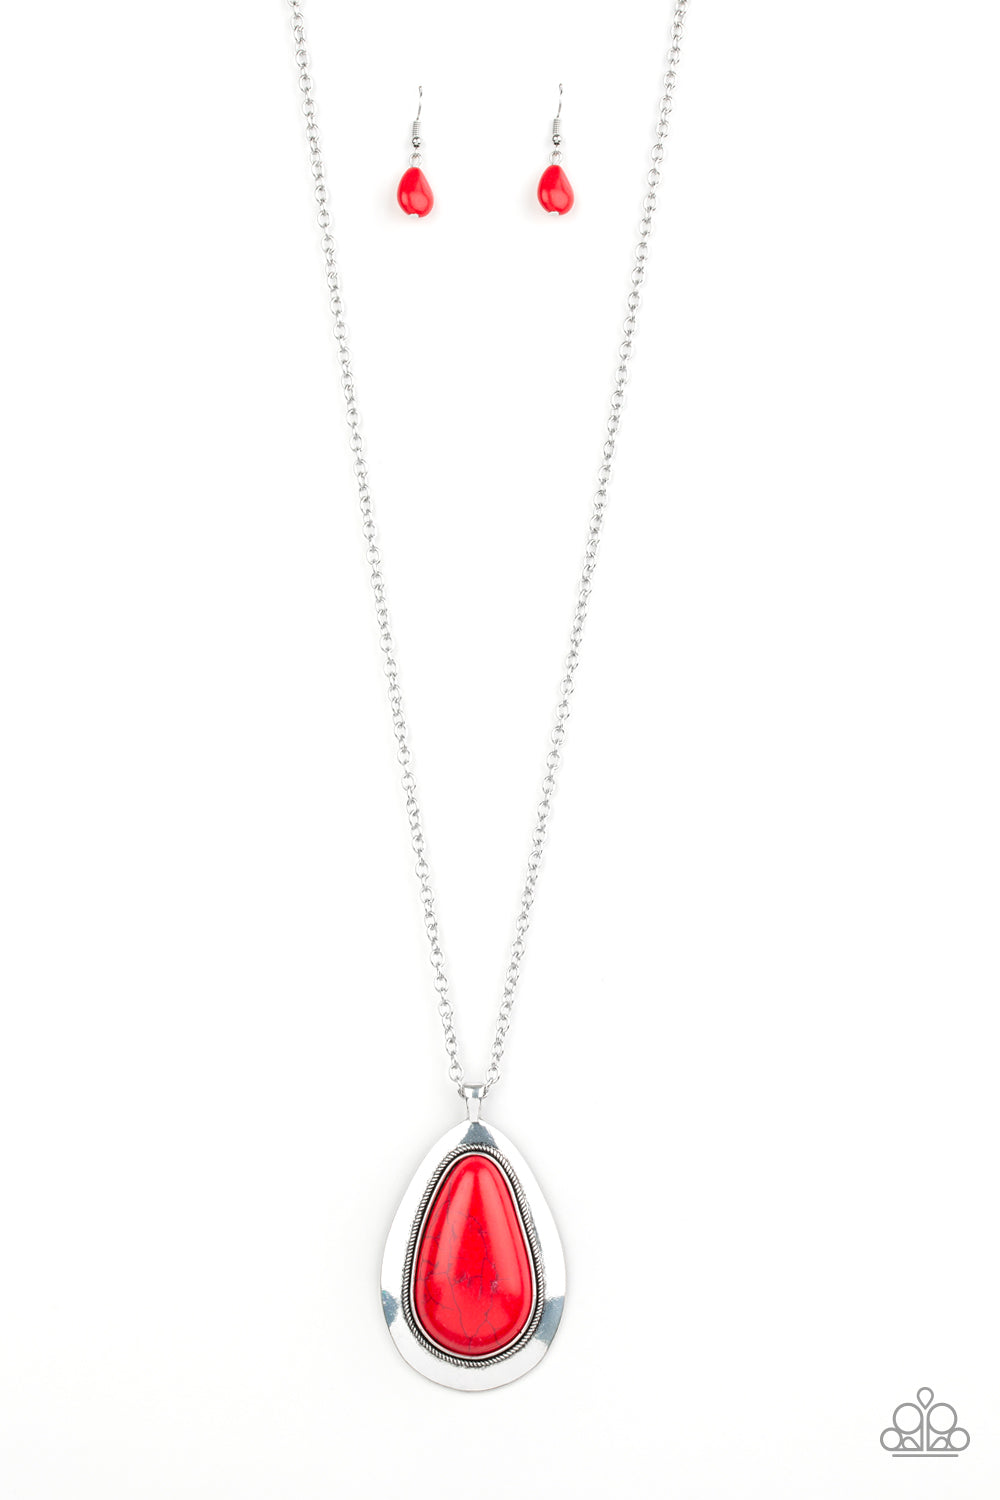 BADLAND To The Bone - Red Necklace